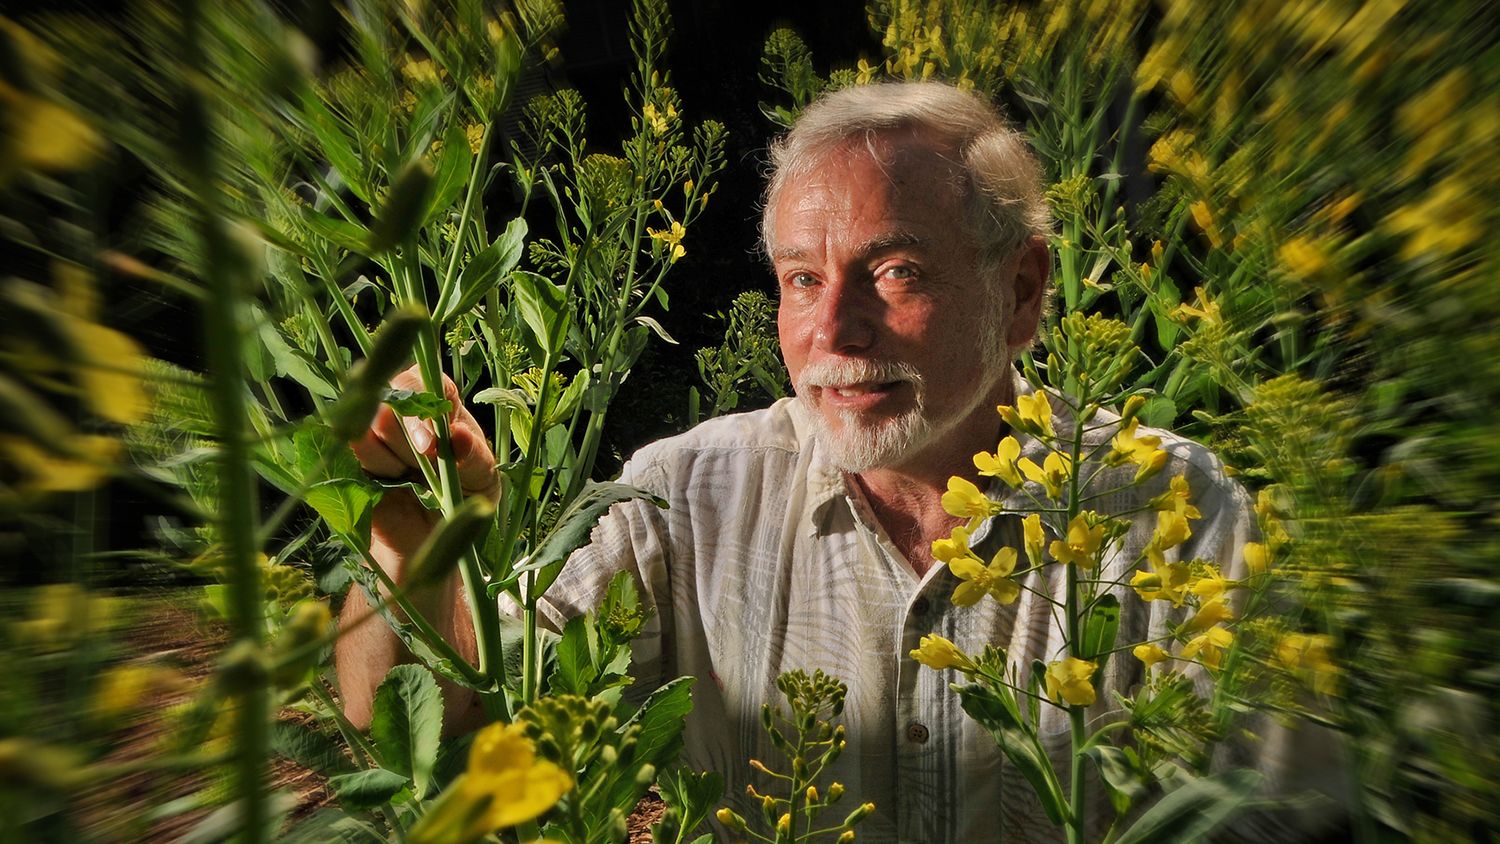 Fred Gould in his garden.